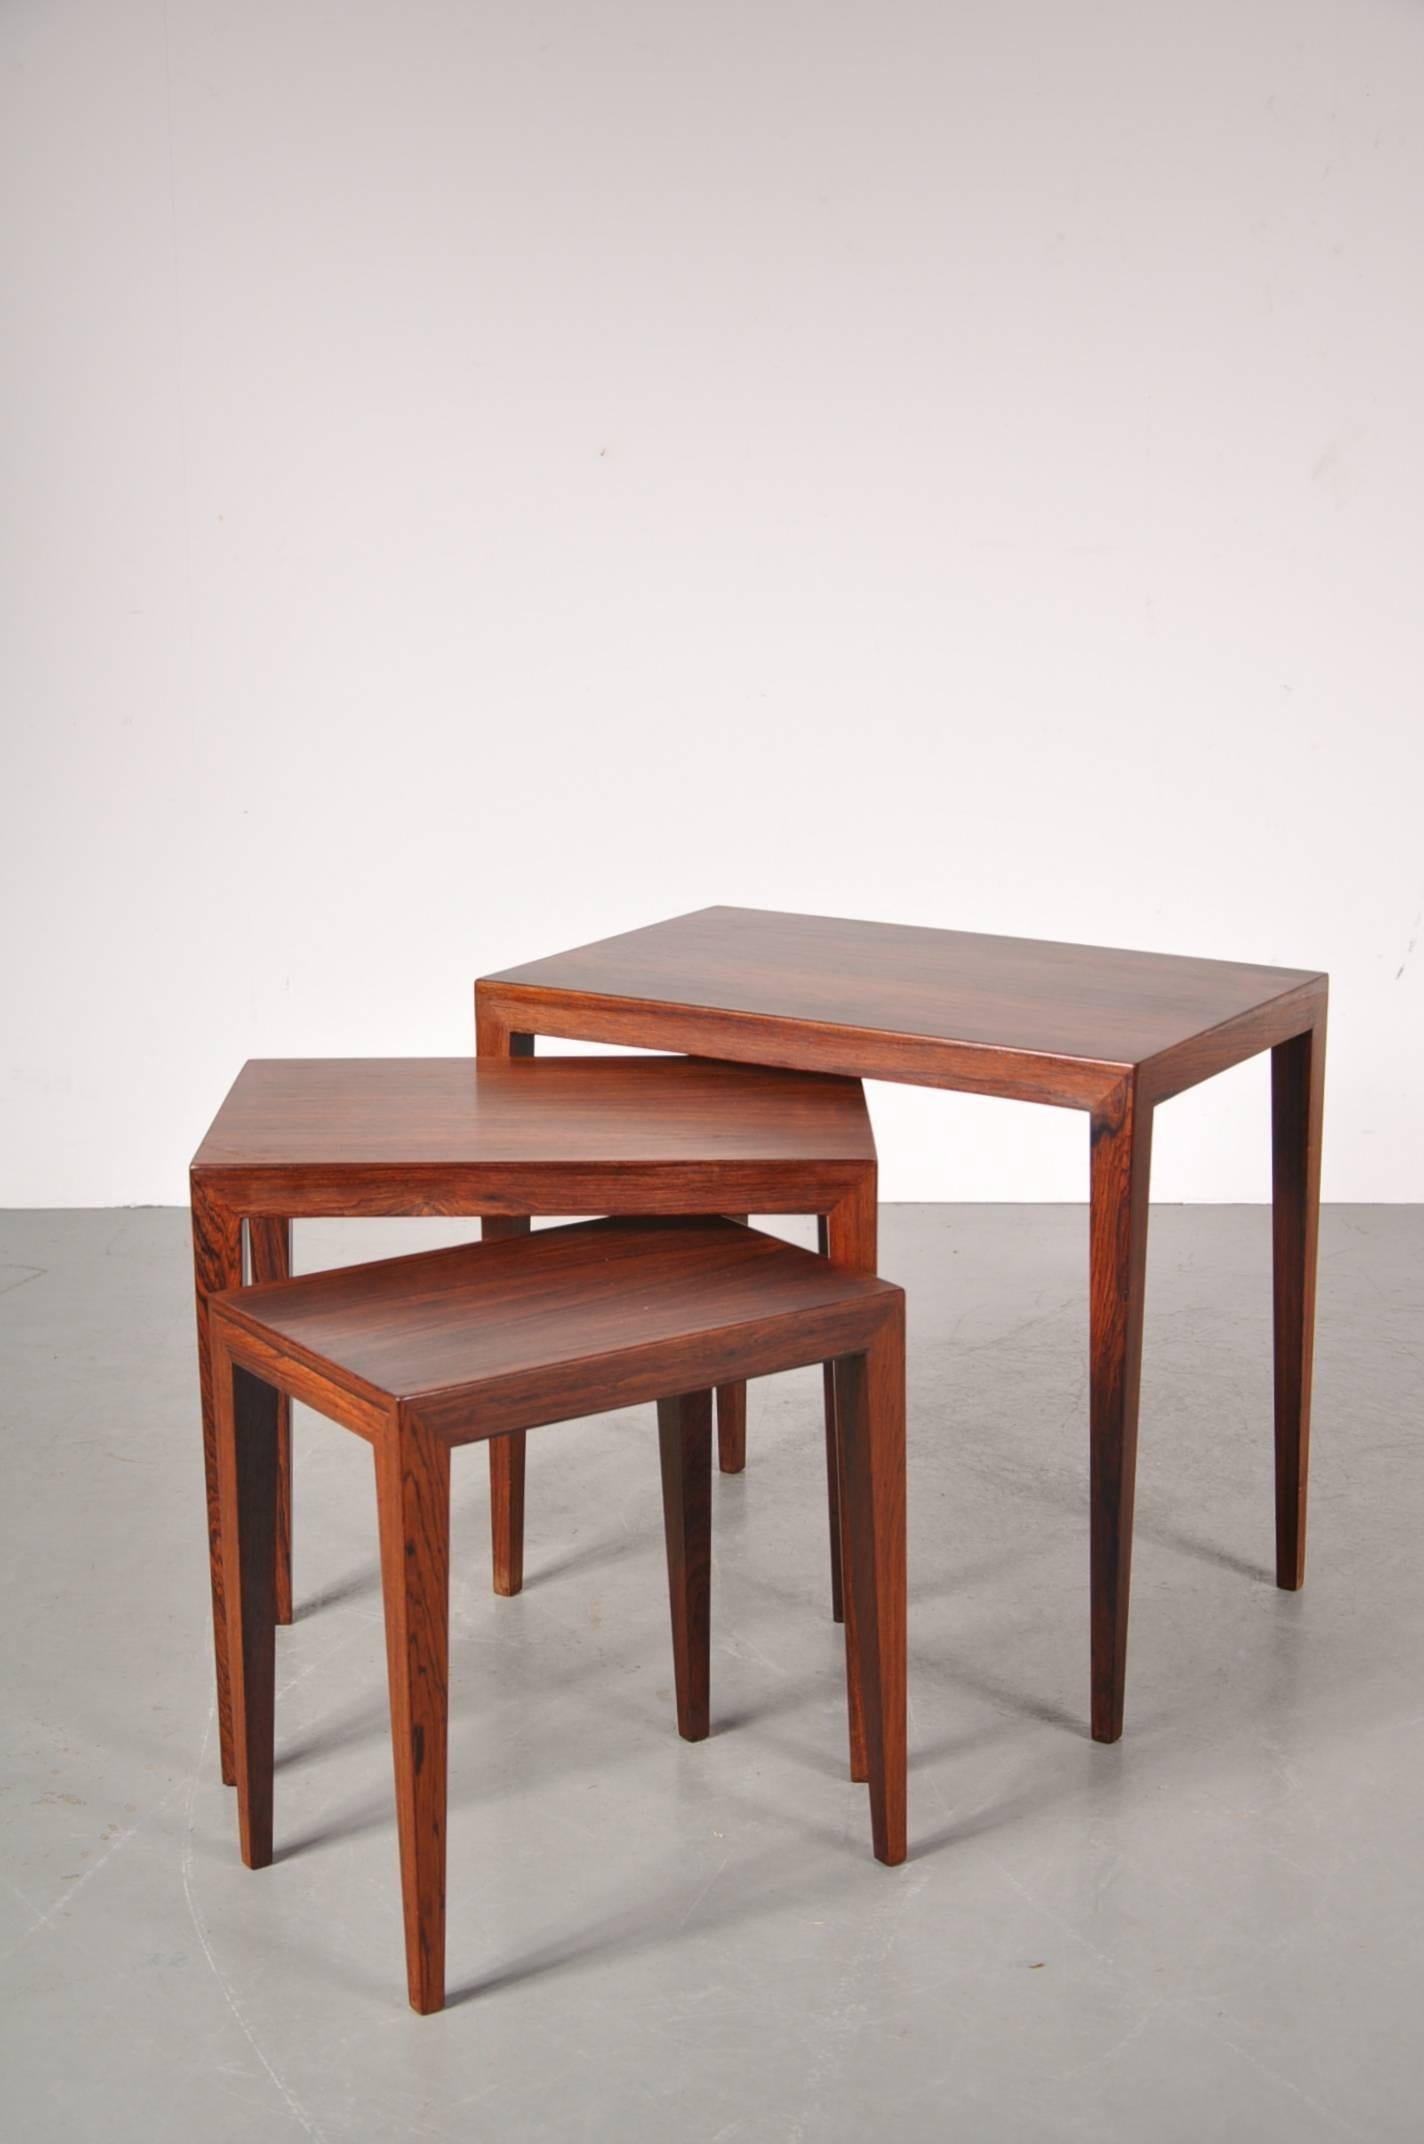 Beautiful set of three nesting tables by Severin Hansen, manufactured by Haslev Mobelsnedkeri, circa 1960.

These eye-catching tables are made of the highest quality rosewood. They would make a wonderful addition to any modern/Scandinavian